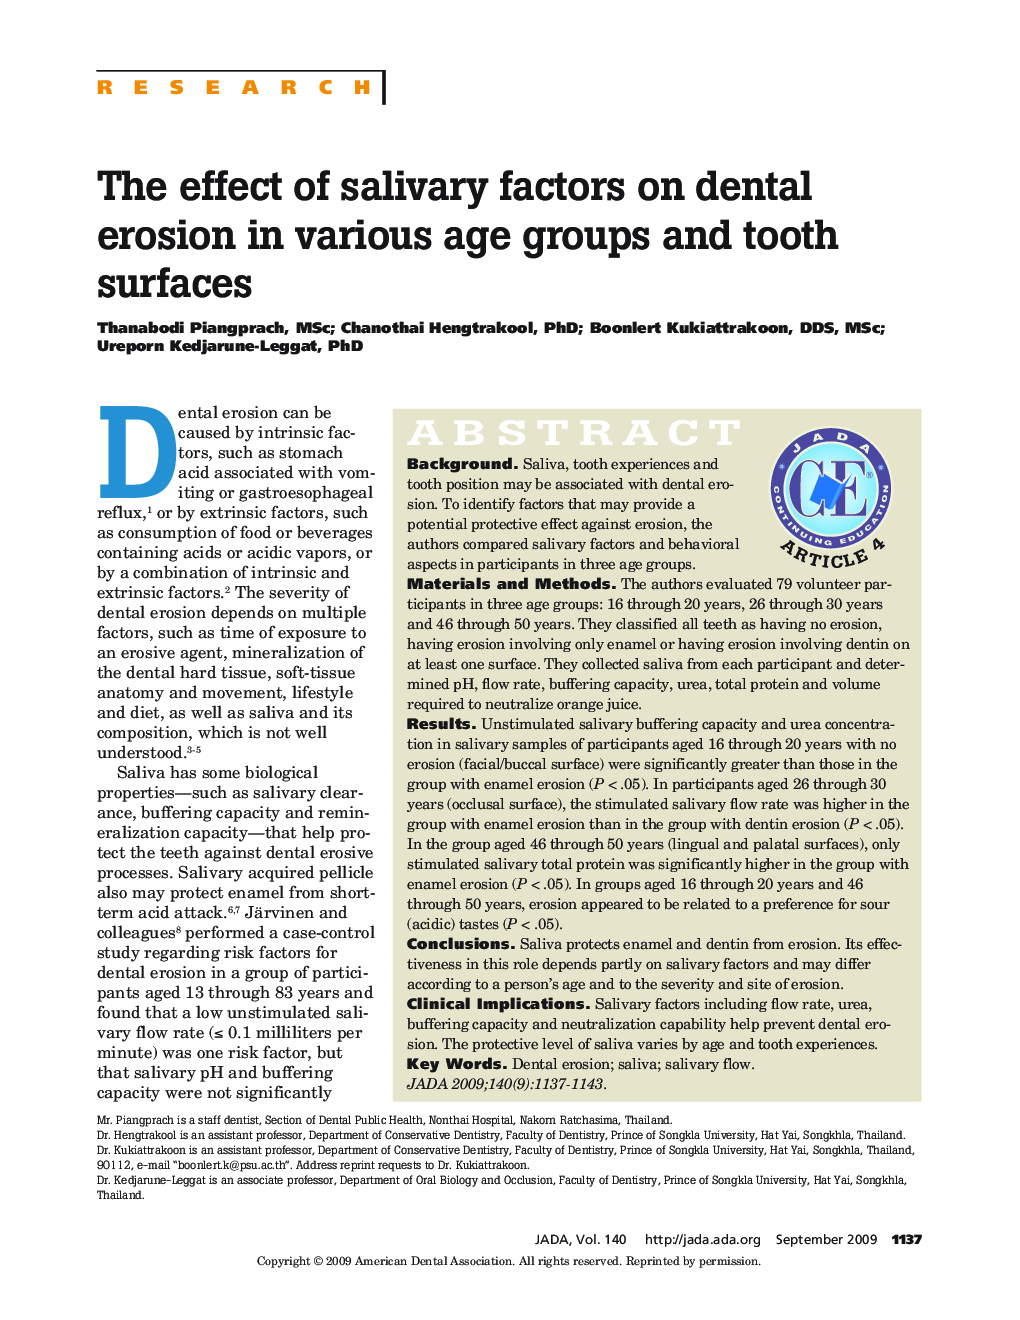 The Effect of Salivary Factors on Dental Erosion in Various Age Groups and Tooth Surfaces 